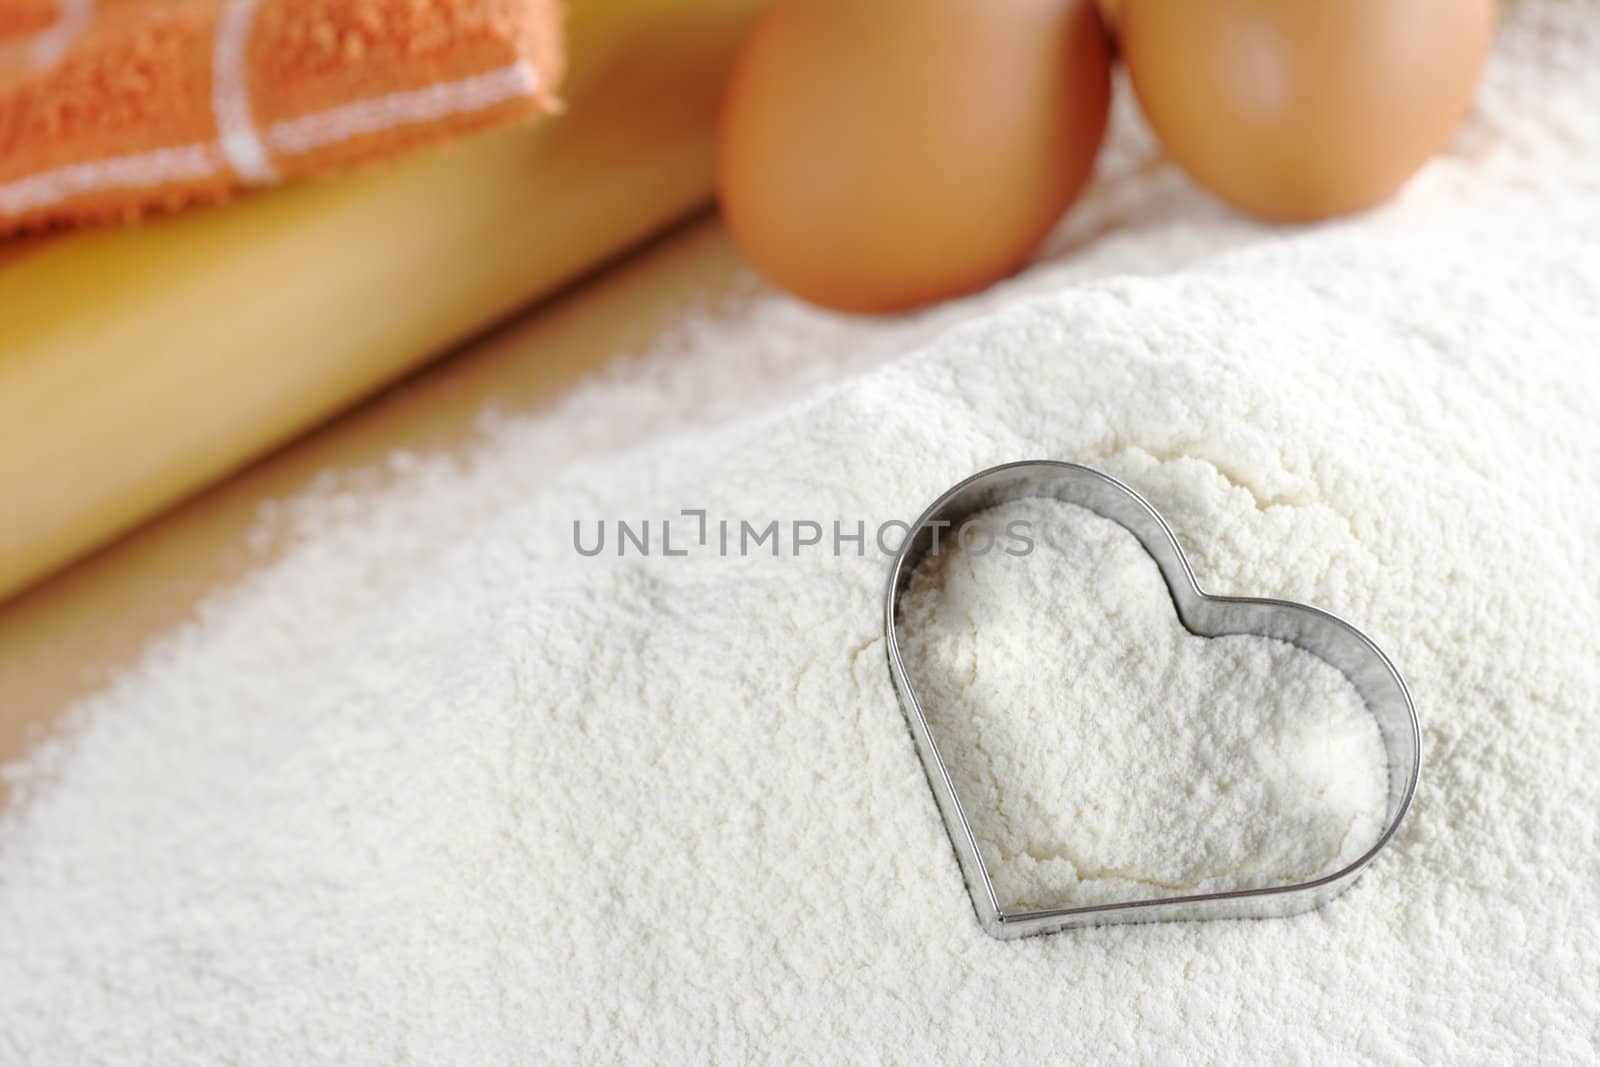 Heart Shaped Cookie Cutter by ildi